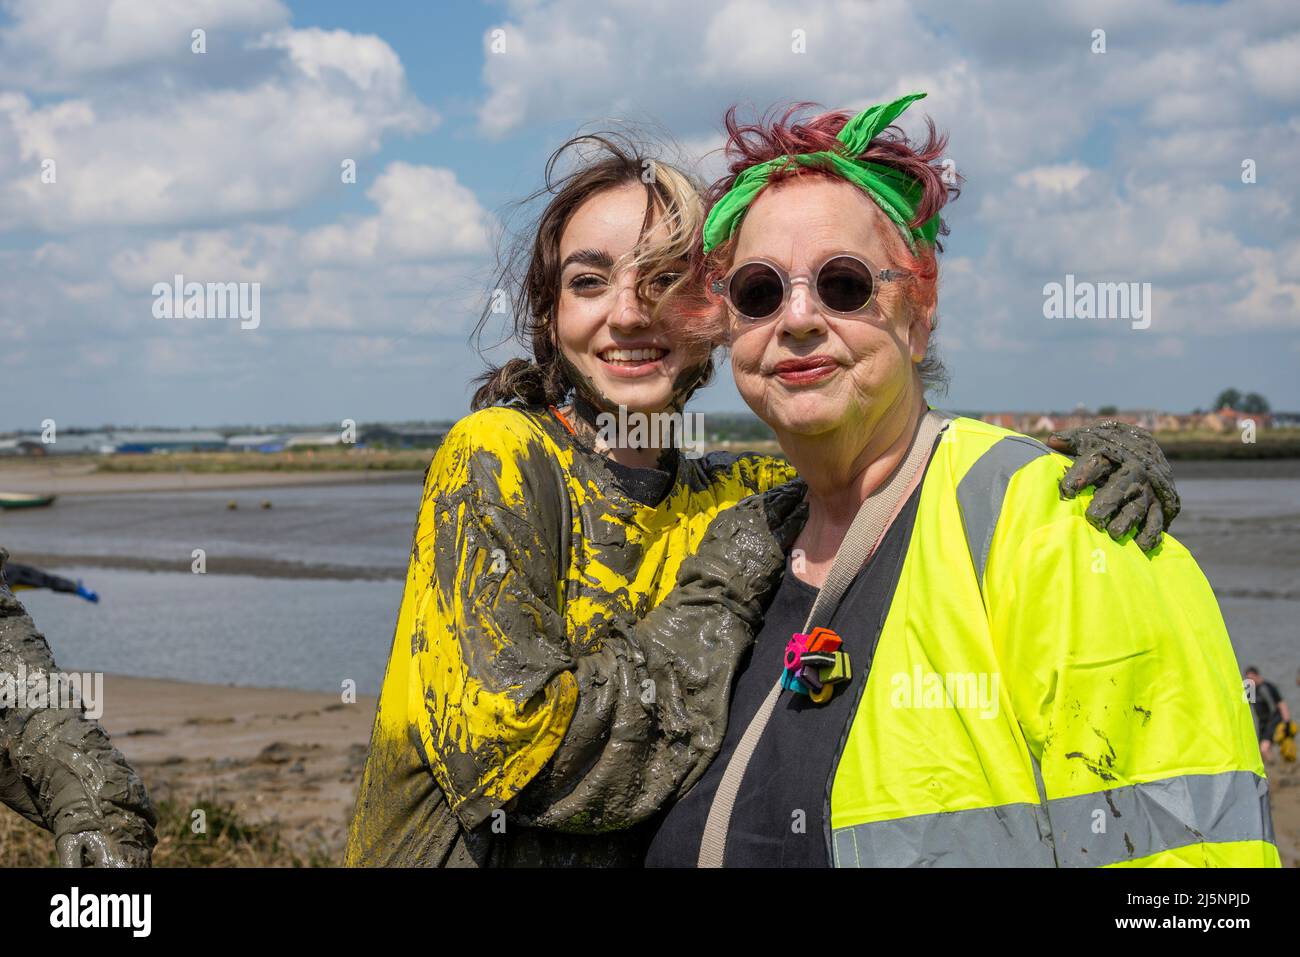 Maisi Bourke with Jo Brand (mother of Maisi) who joined them after the completion of the Maldon Mud Race, Essex, UK. Muddy race for charity Stock Photo